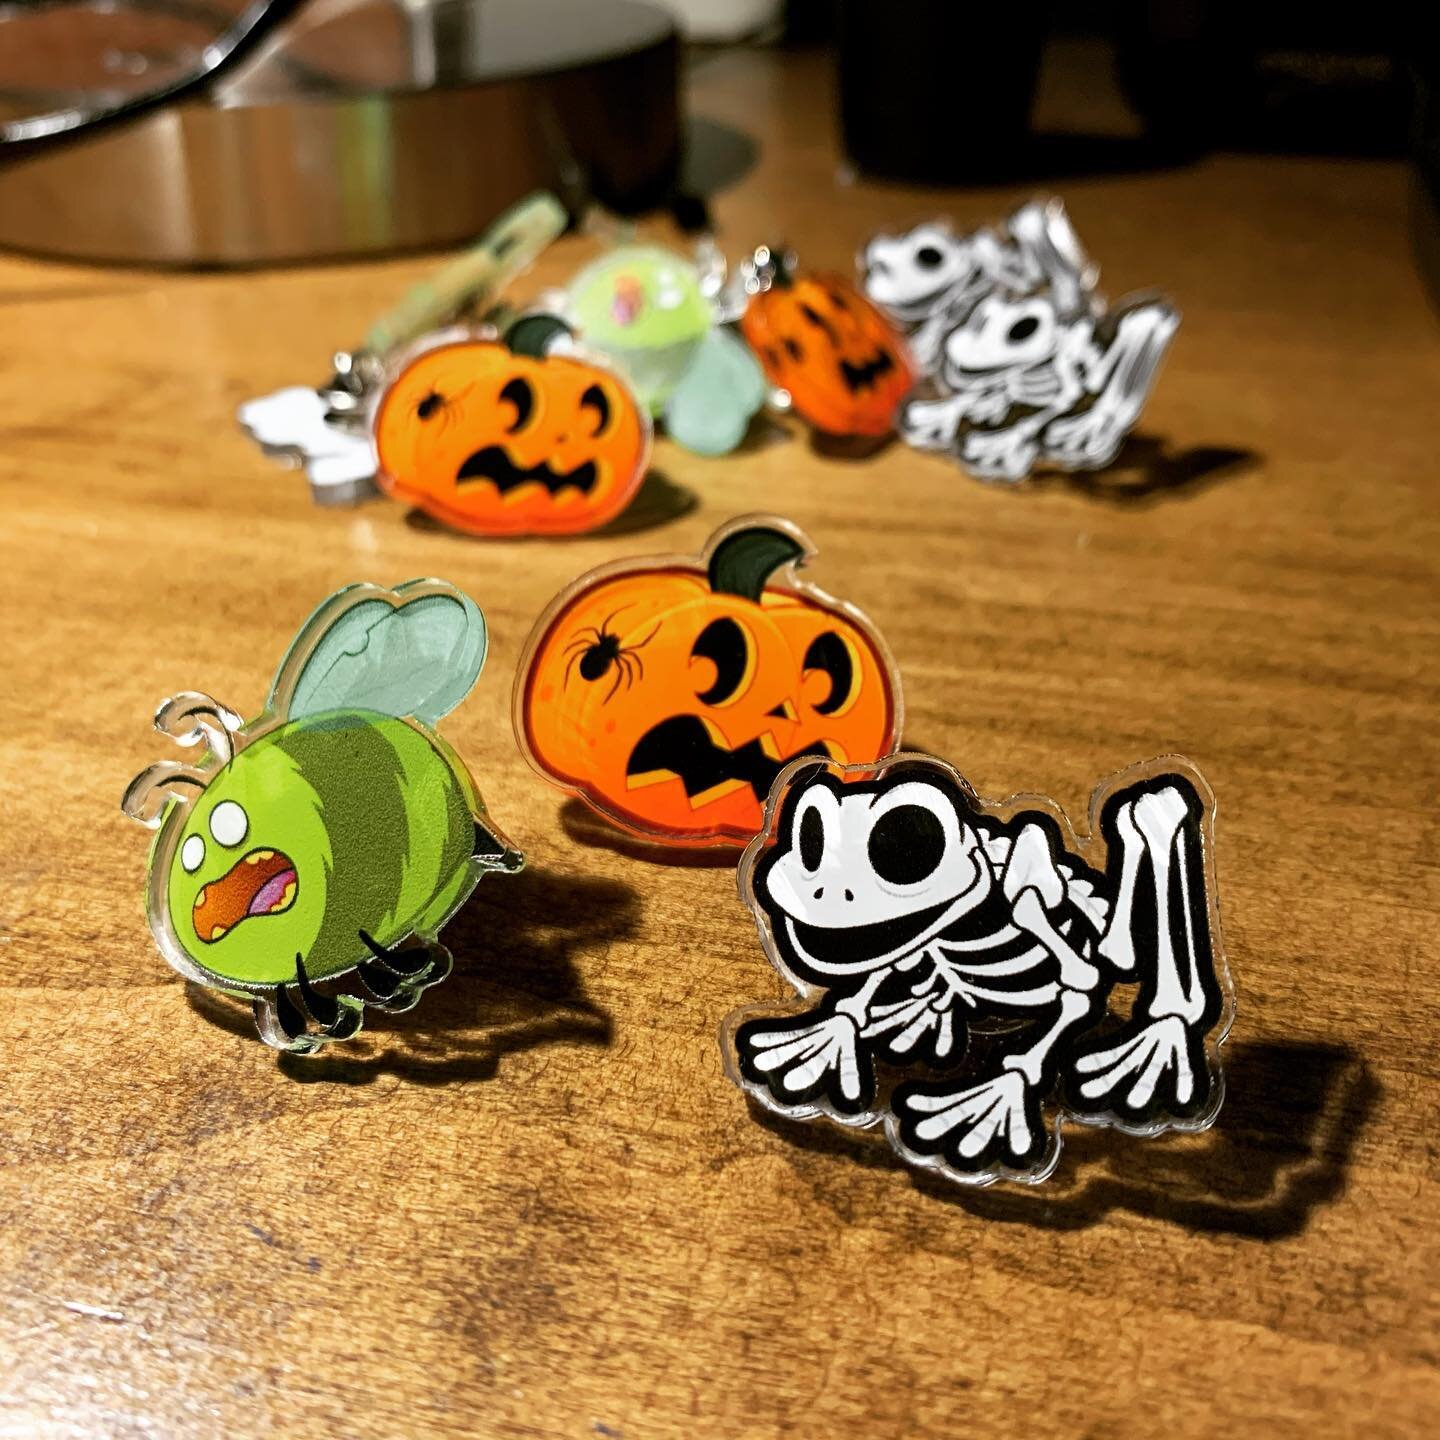 Halloween approaches! A friendly reminder that my acrylic pins are on sale until the end of the month!

victorpierceart.com/store 🎃
.
.
.
#merchandise #sale #acrylicpins #halloween #skeleton #frog #pumpkin #jackolantern #zombie #bee #cute #spooky #v